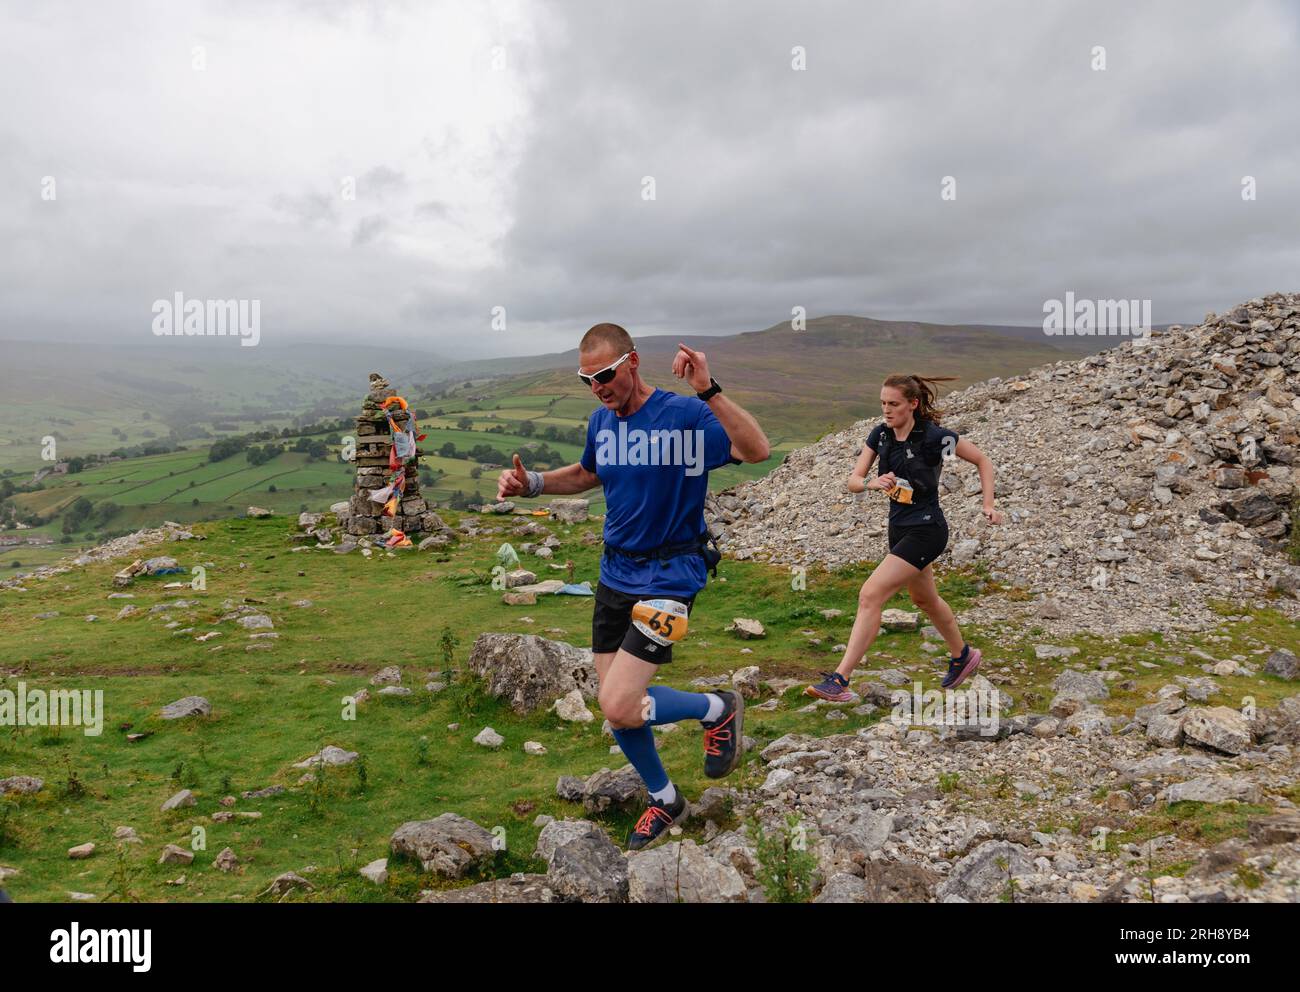 Runners in a race on the hills above Reeth in North Yorkshire. Stock Photo